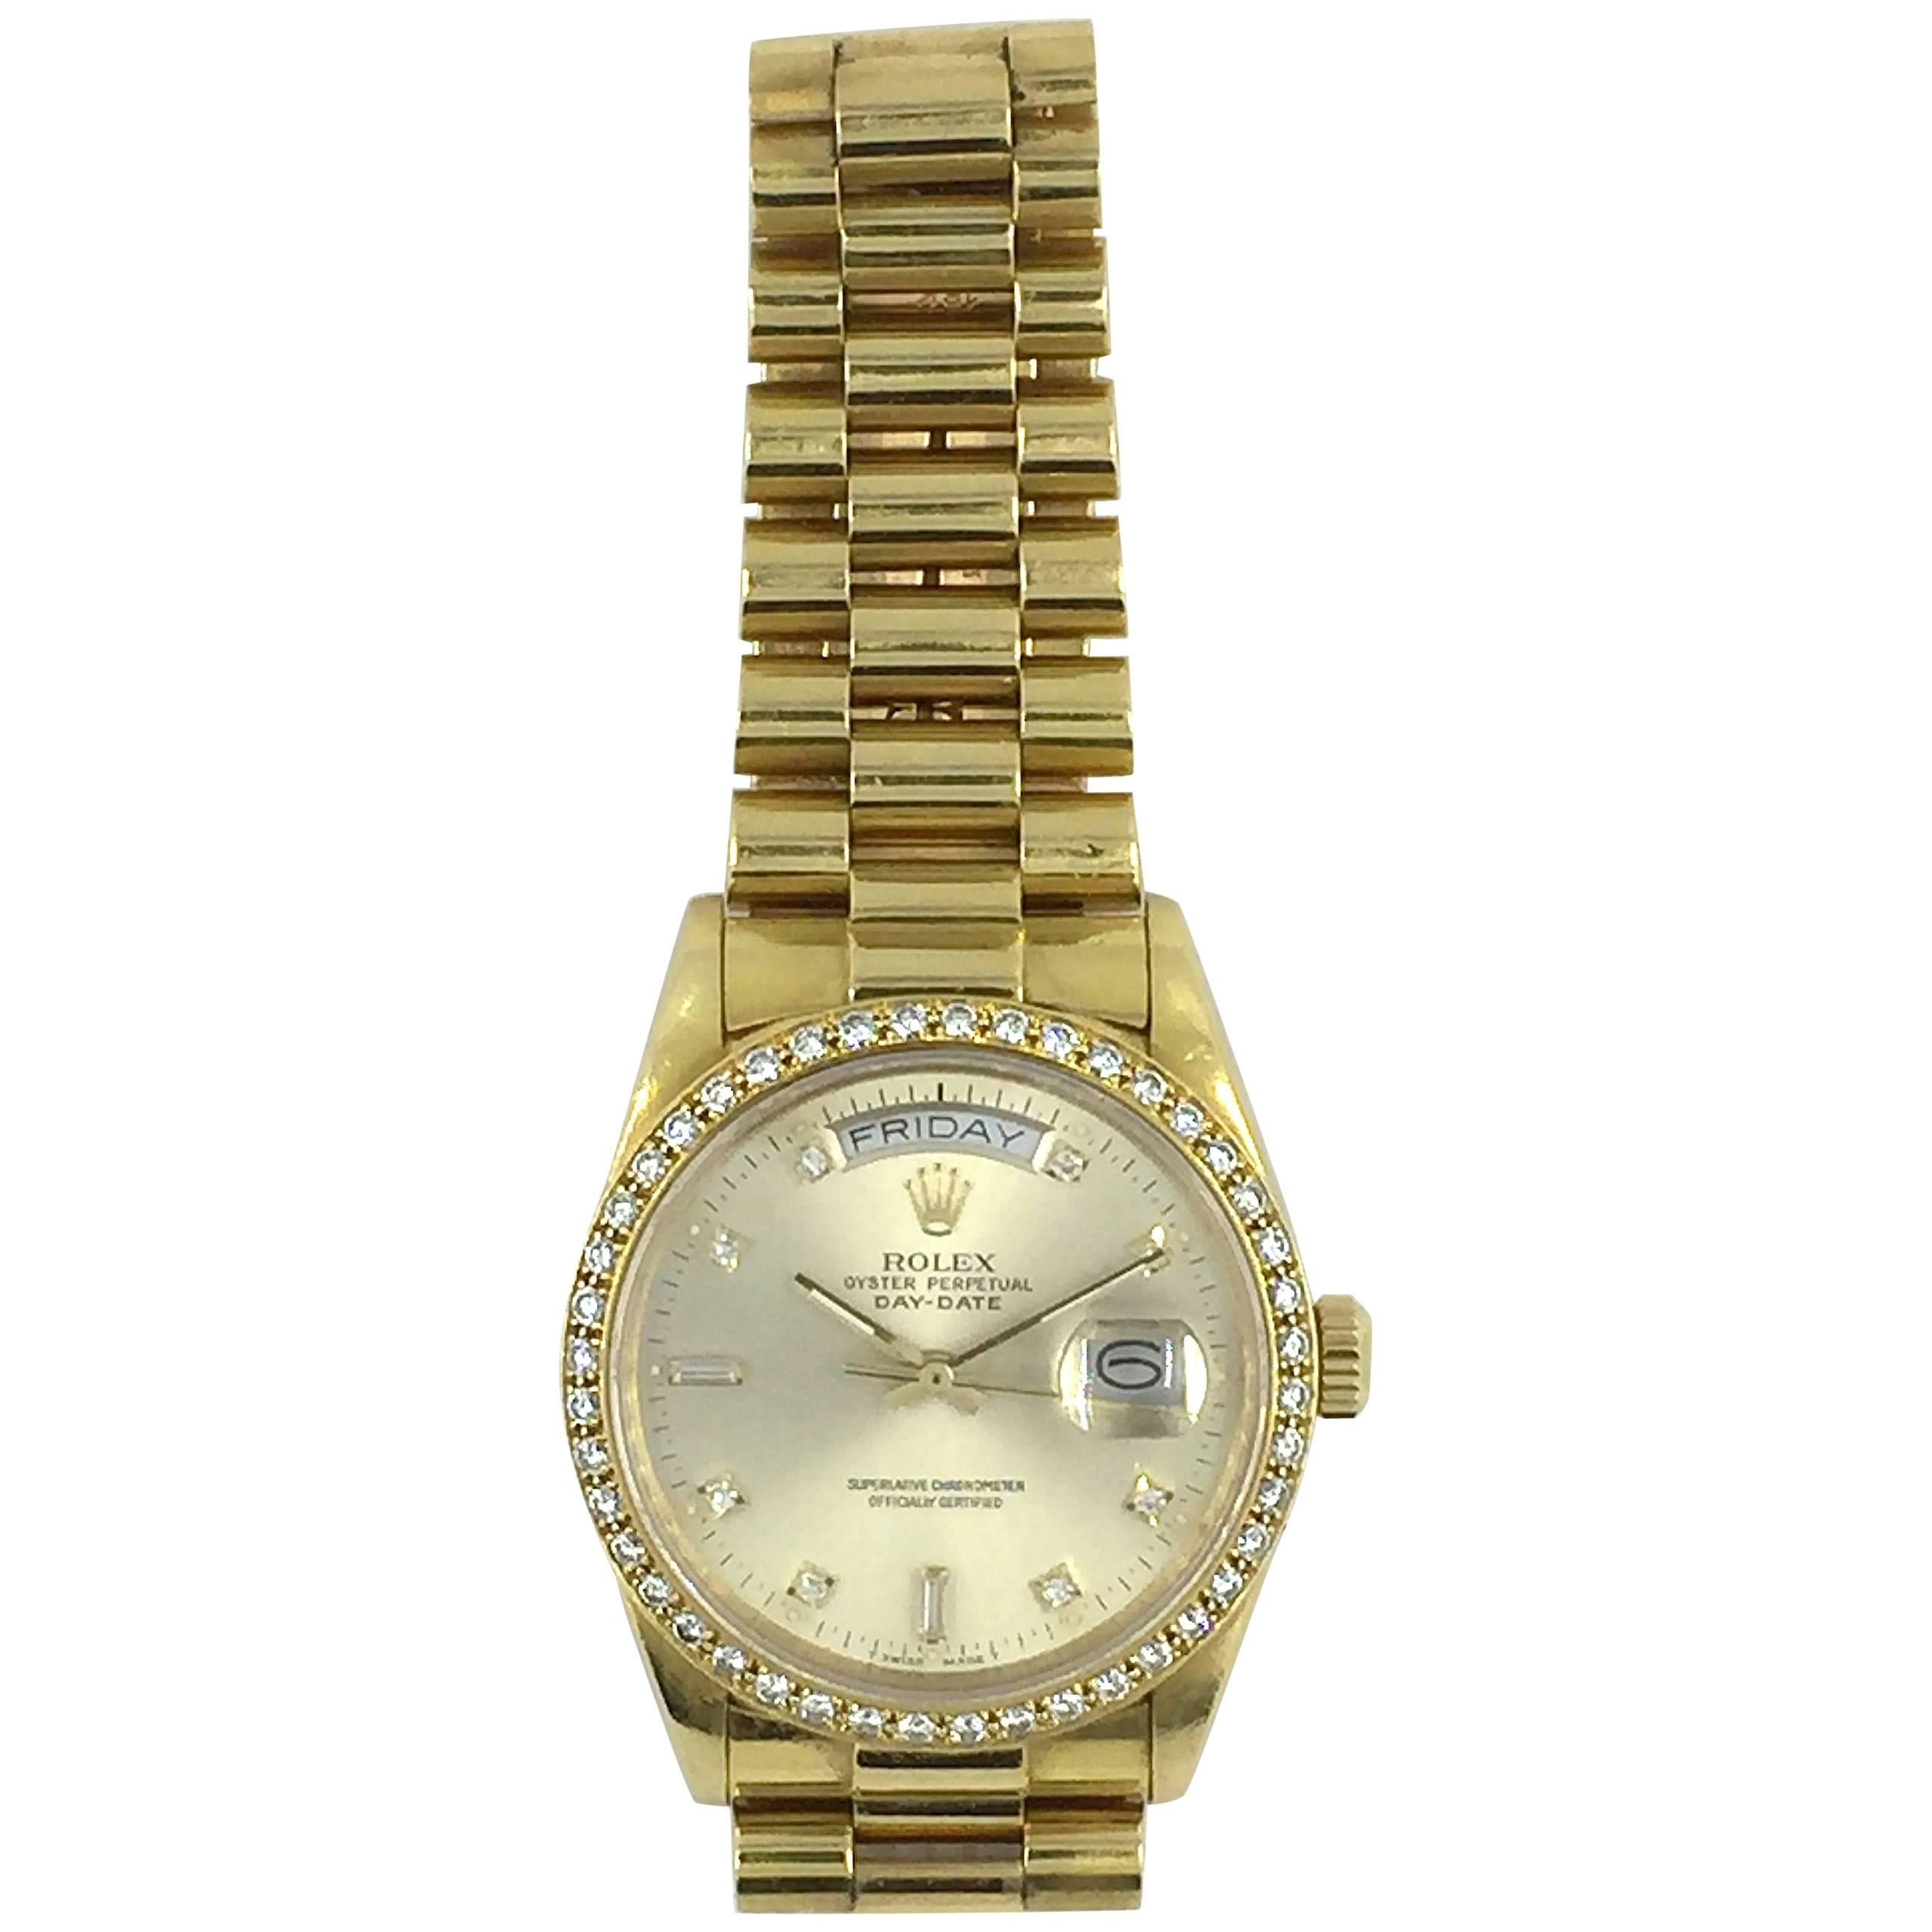 Rolex Yellow Gold Factory Diamond Dial and Bezel Day-Date President Wristwatch